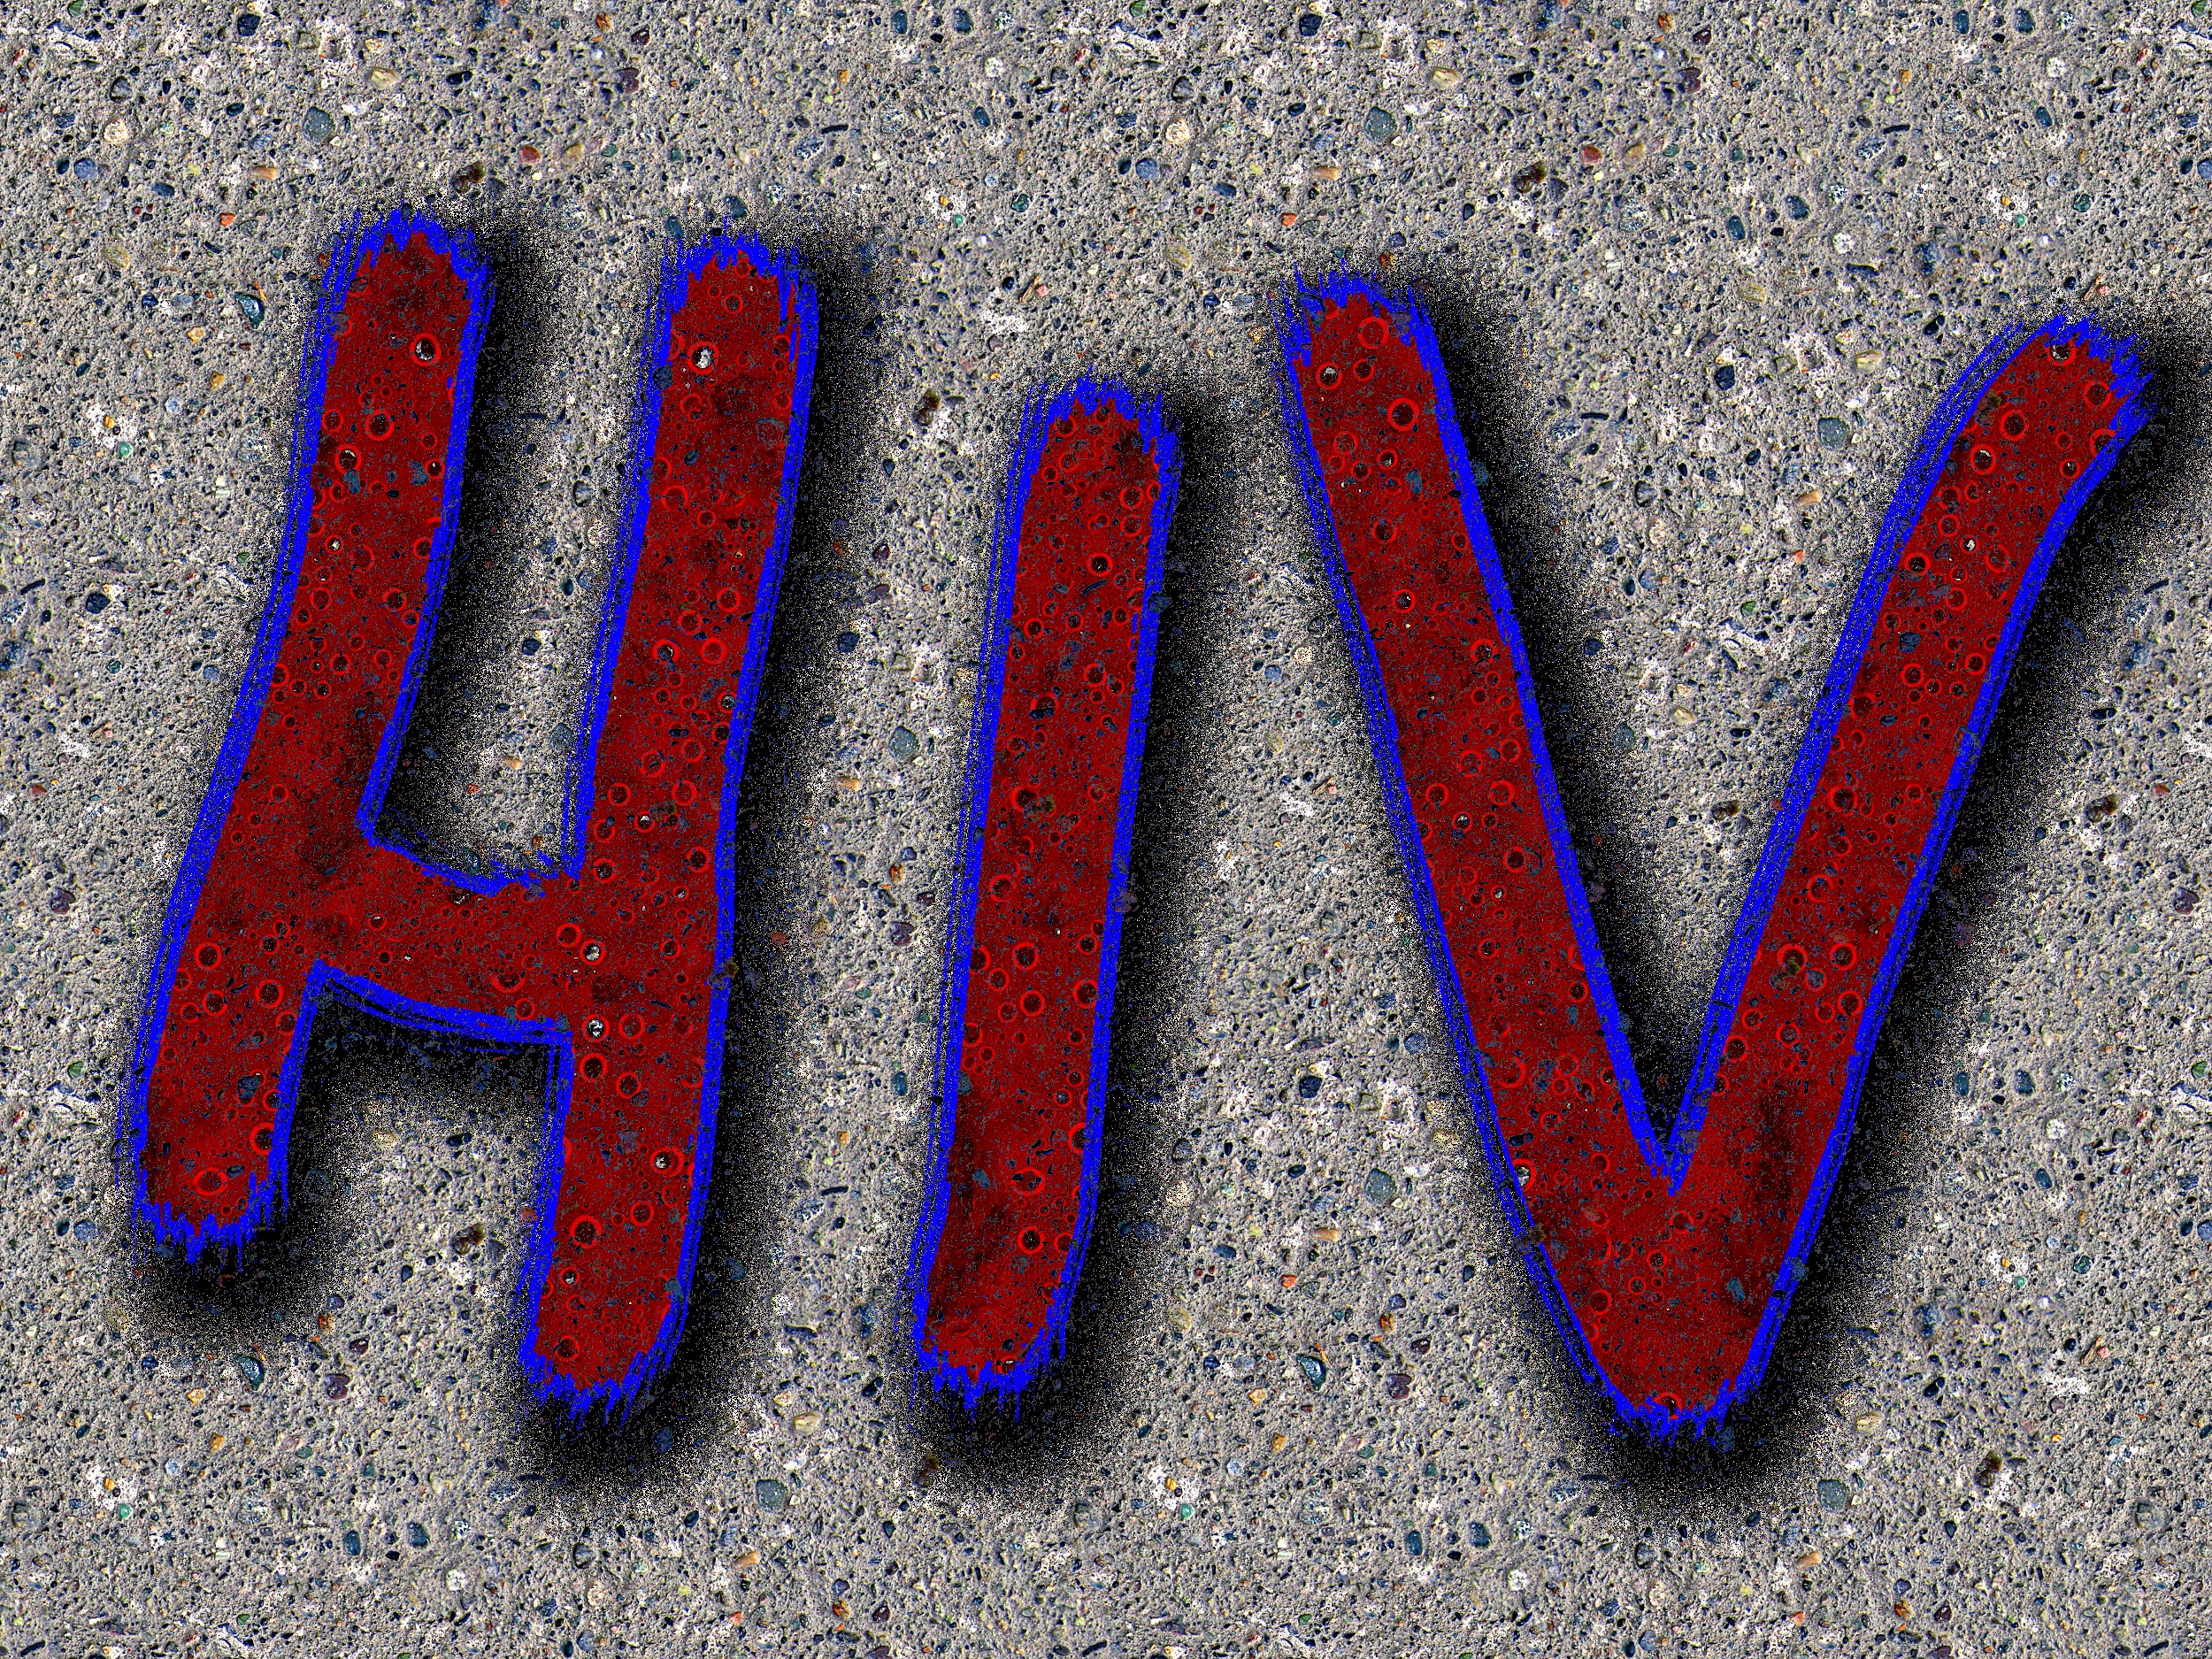 COMMENT | You know that AIDS and HIV are two different things… right?